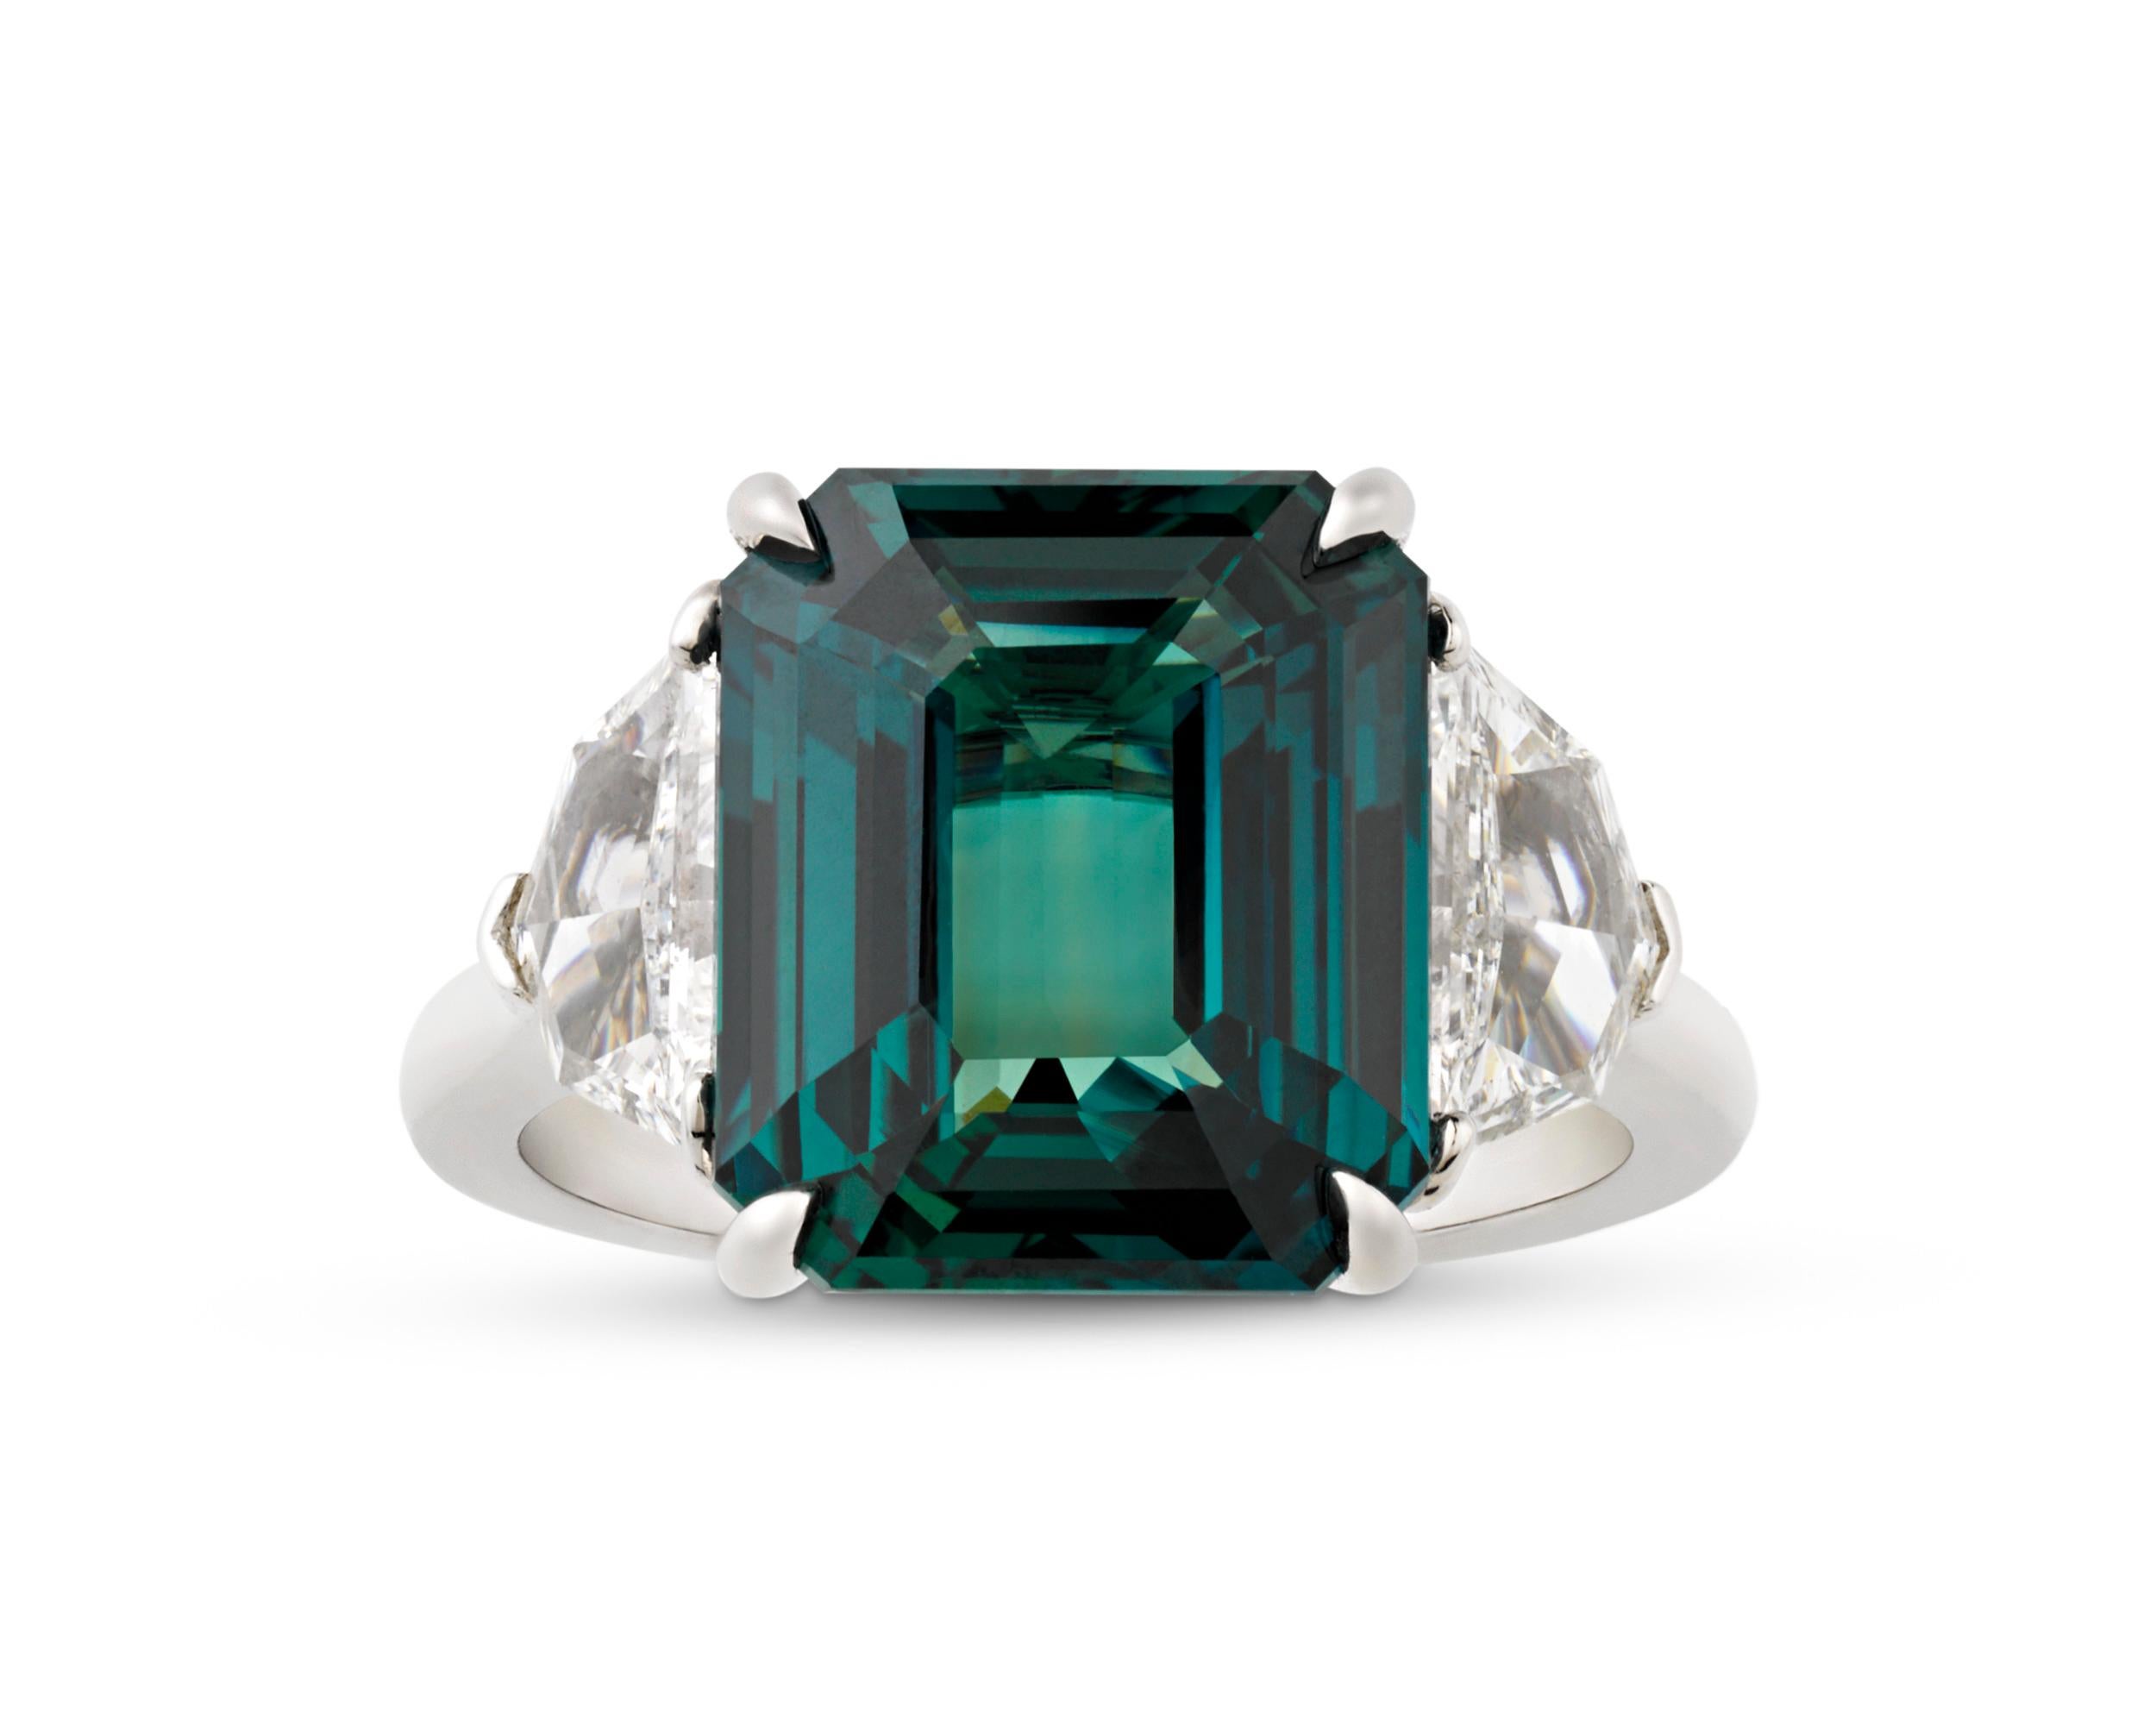 An untreated bluish-green sapphire weighing 8.03 carats centers this dazzling ring. The fancy color sapphire is certified by both the Gemological Institute of America and C. Dunaigre as untreated and of Ceylon origin. With its stunning beauty and